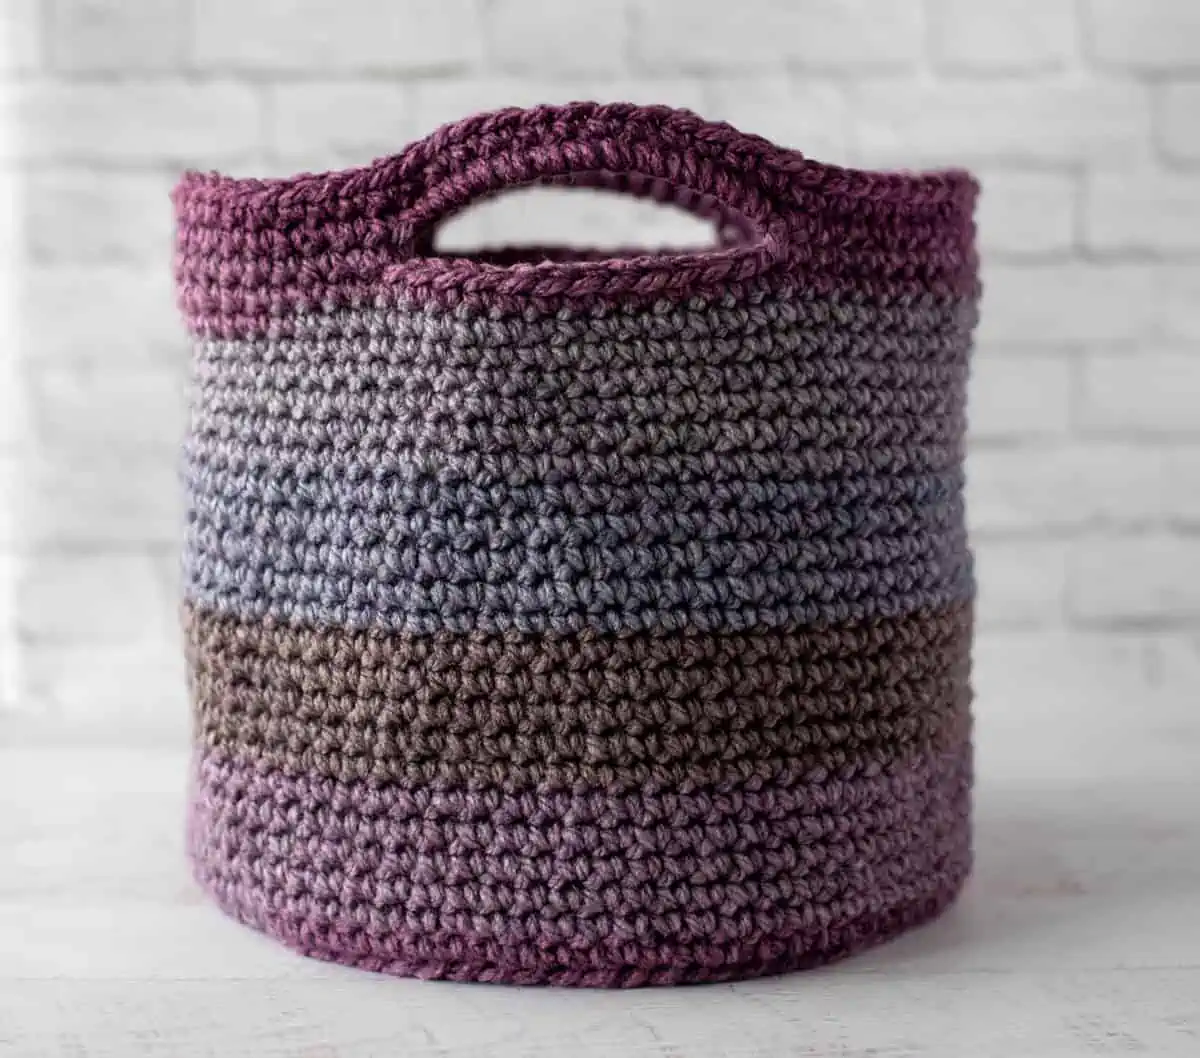 How to Crochet a Basket 